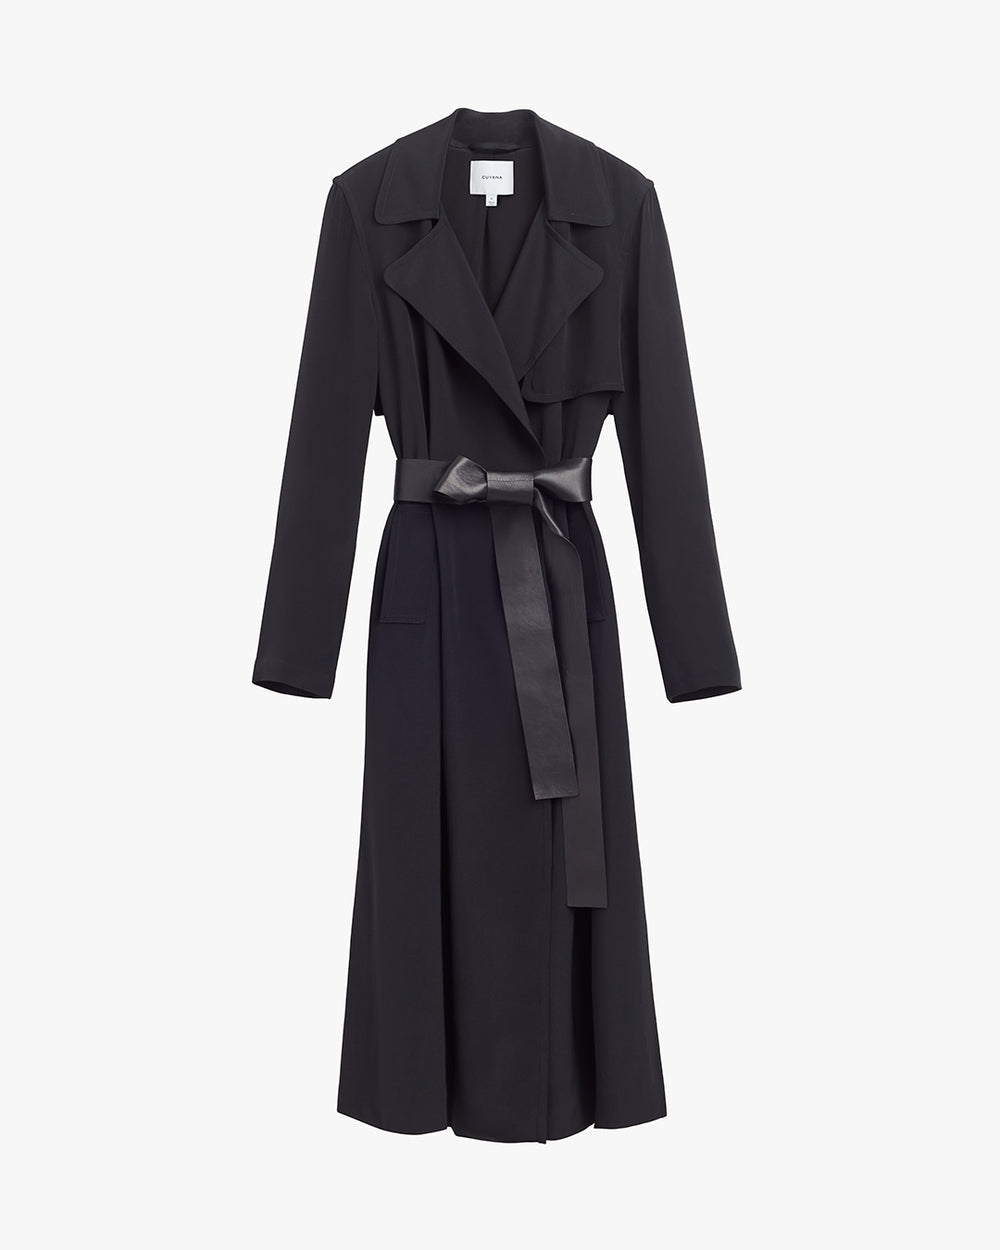 Long coat with belt and large lapels on a plain background